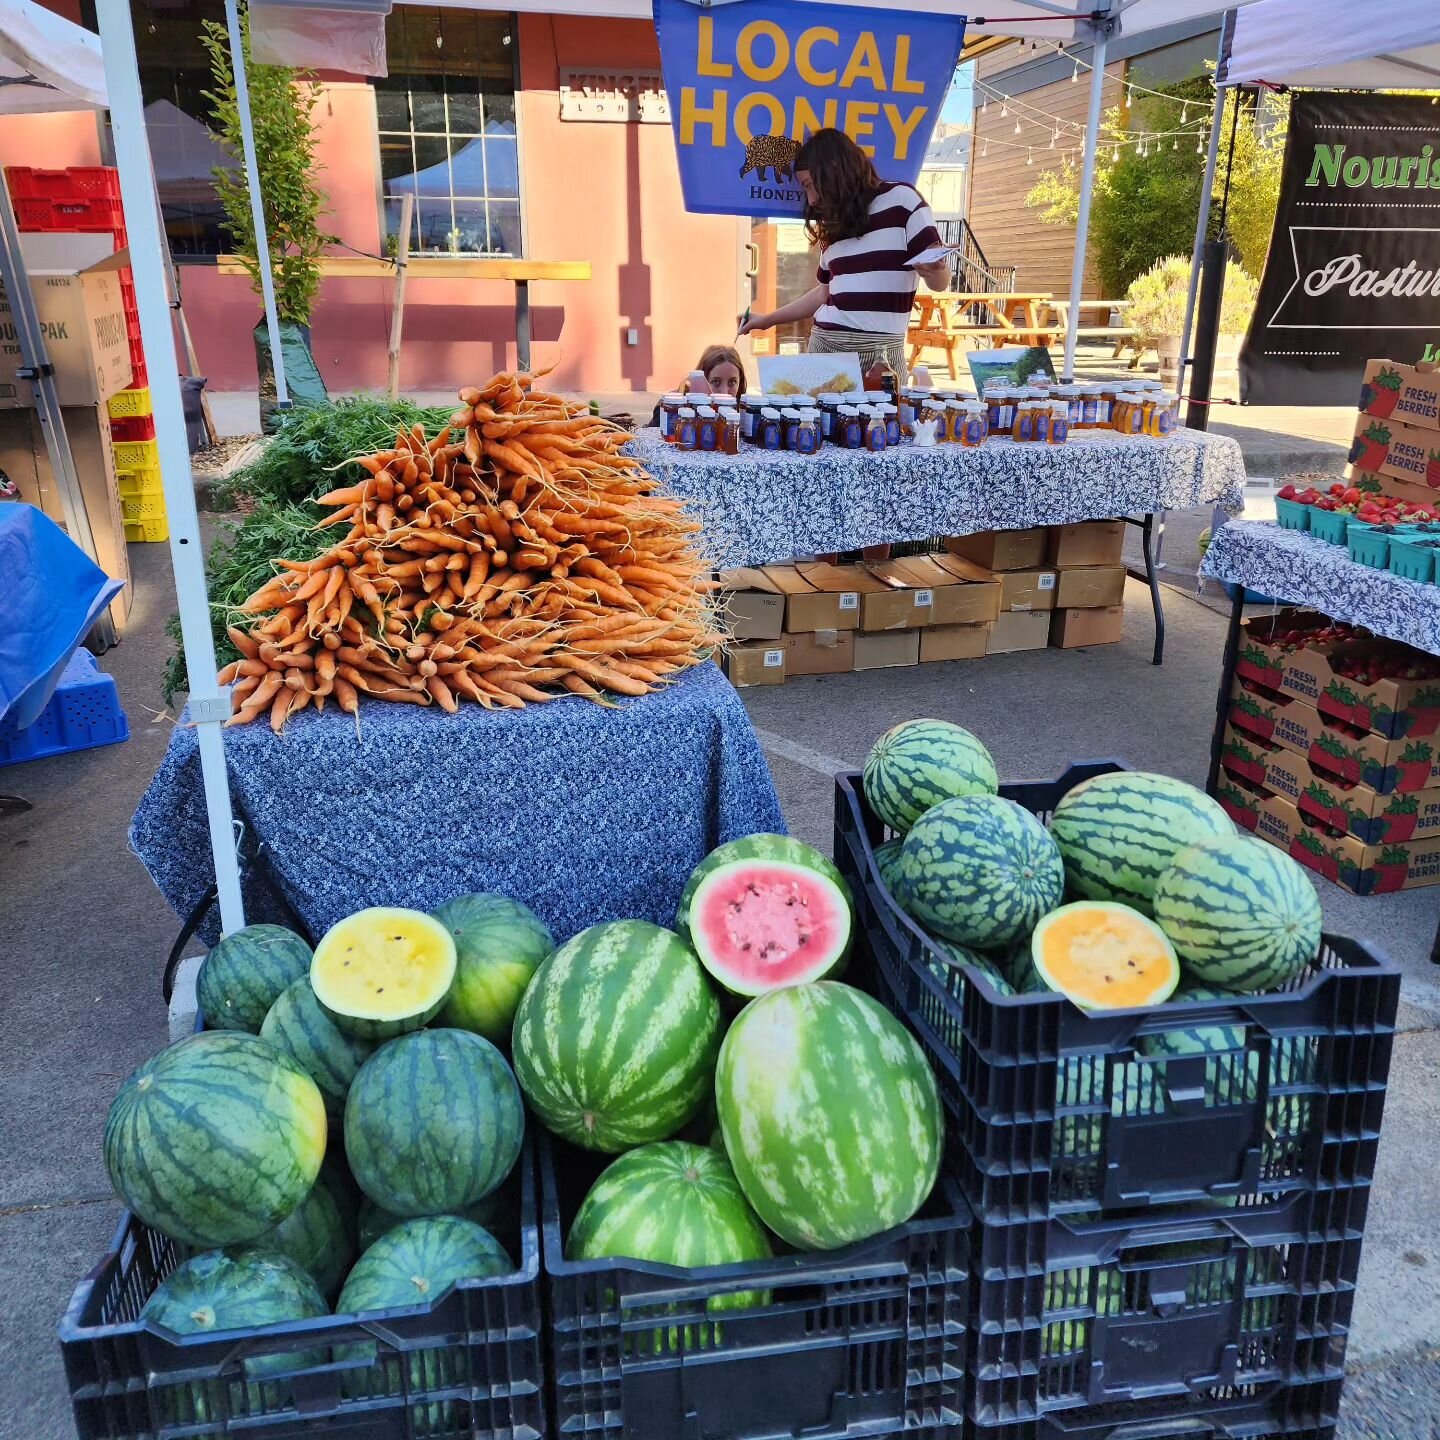 Lots of watermelons and plenty of strawberries today down at the waterfront @corvallisfarmersmarket